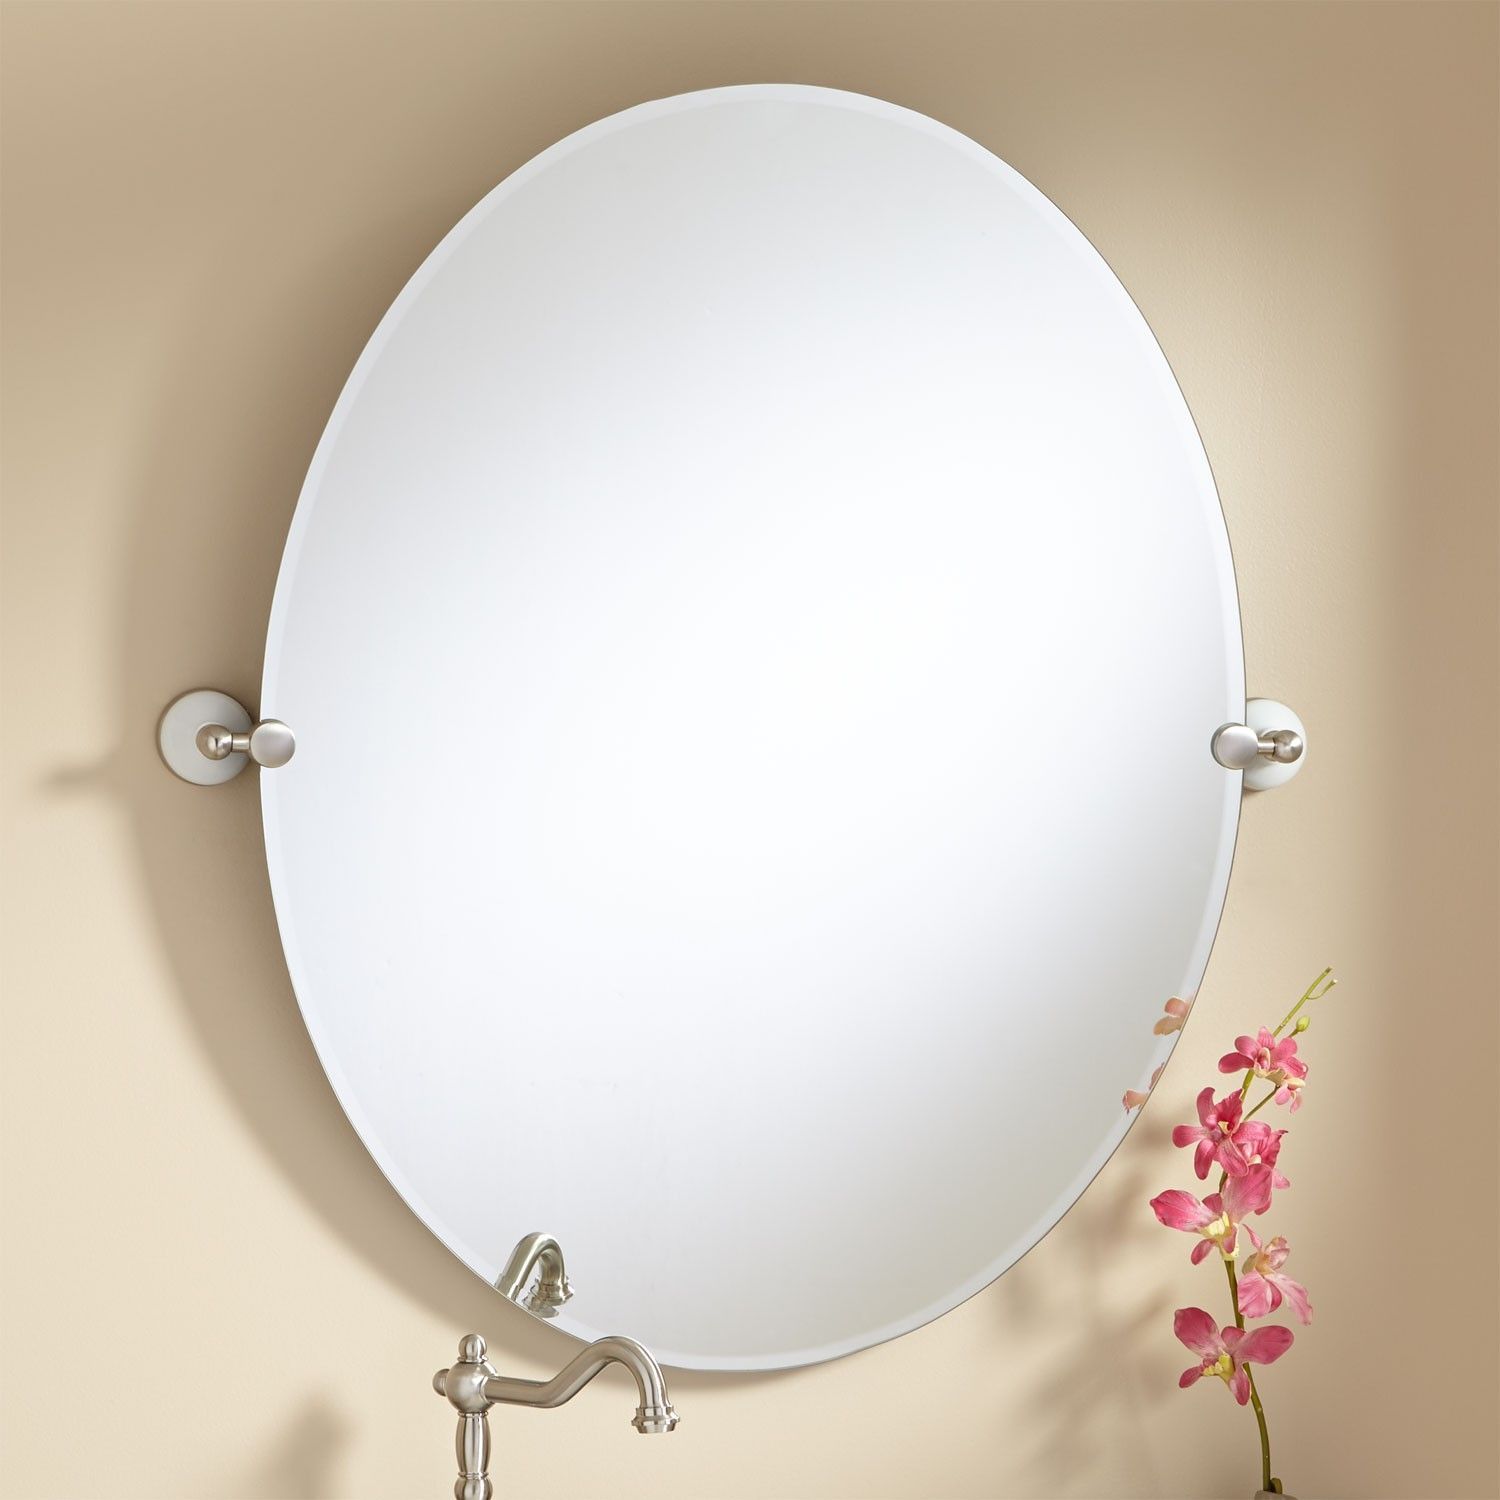 36" Houston Oval Tilting Mirror | Mirror, Decorative Bathroom Mirrors Intended For Ceiling Hung Satin Chrome Oval Mirrors (View 1 of 15)